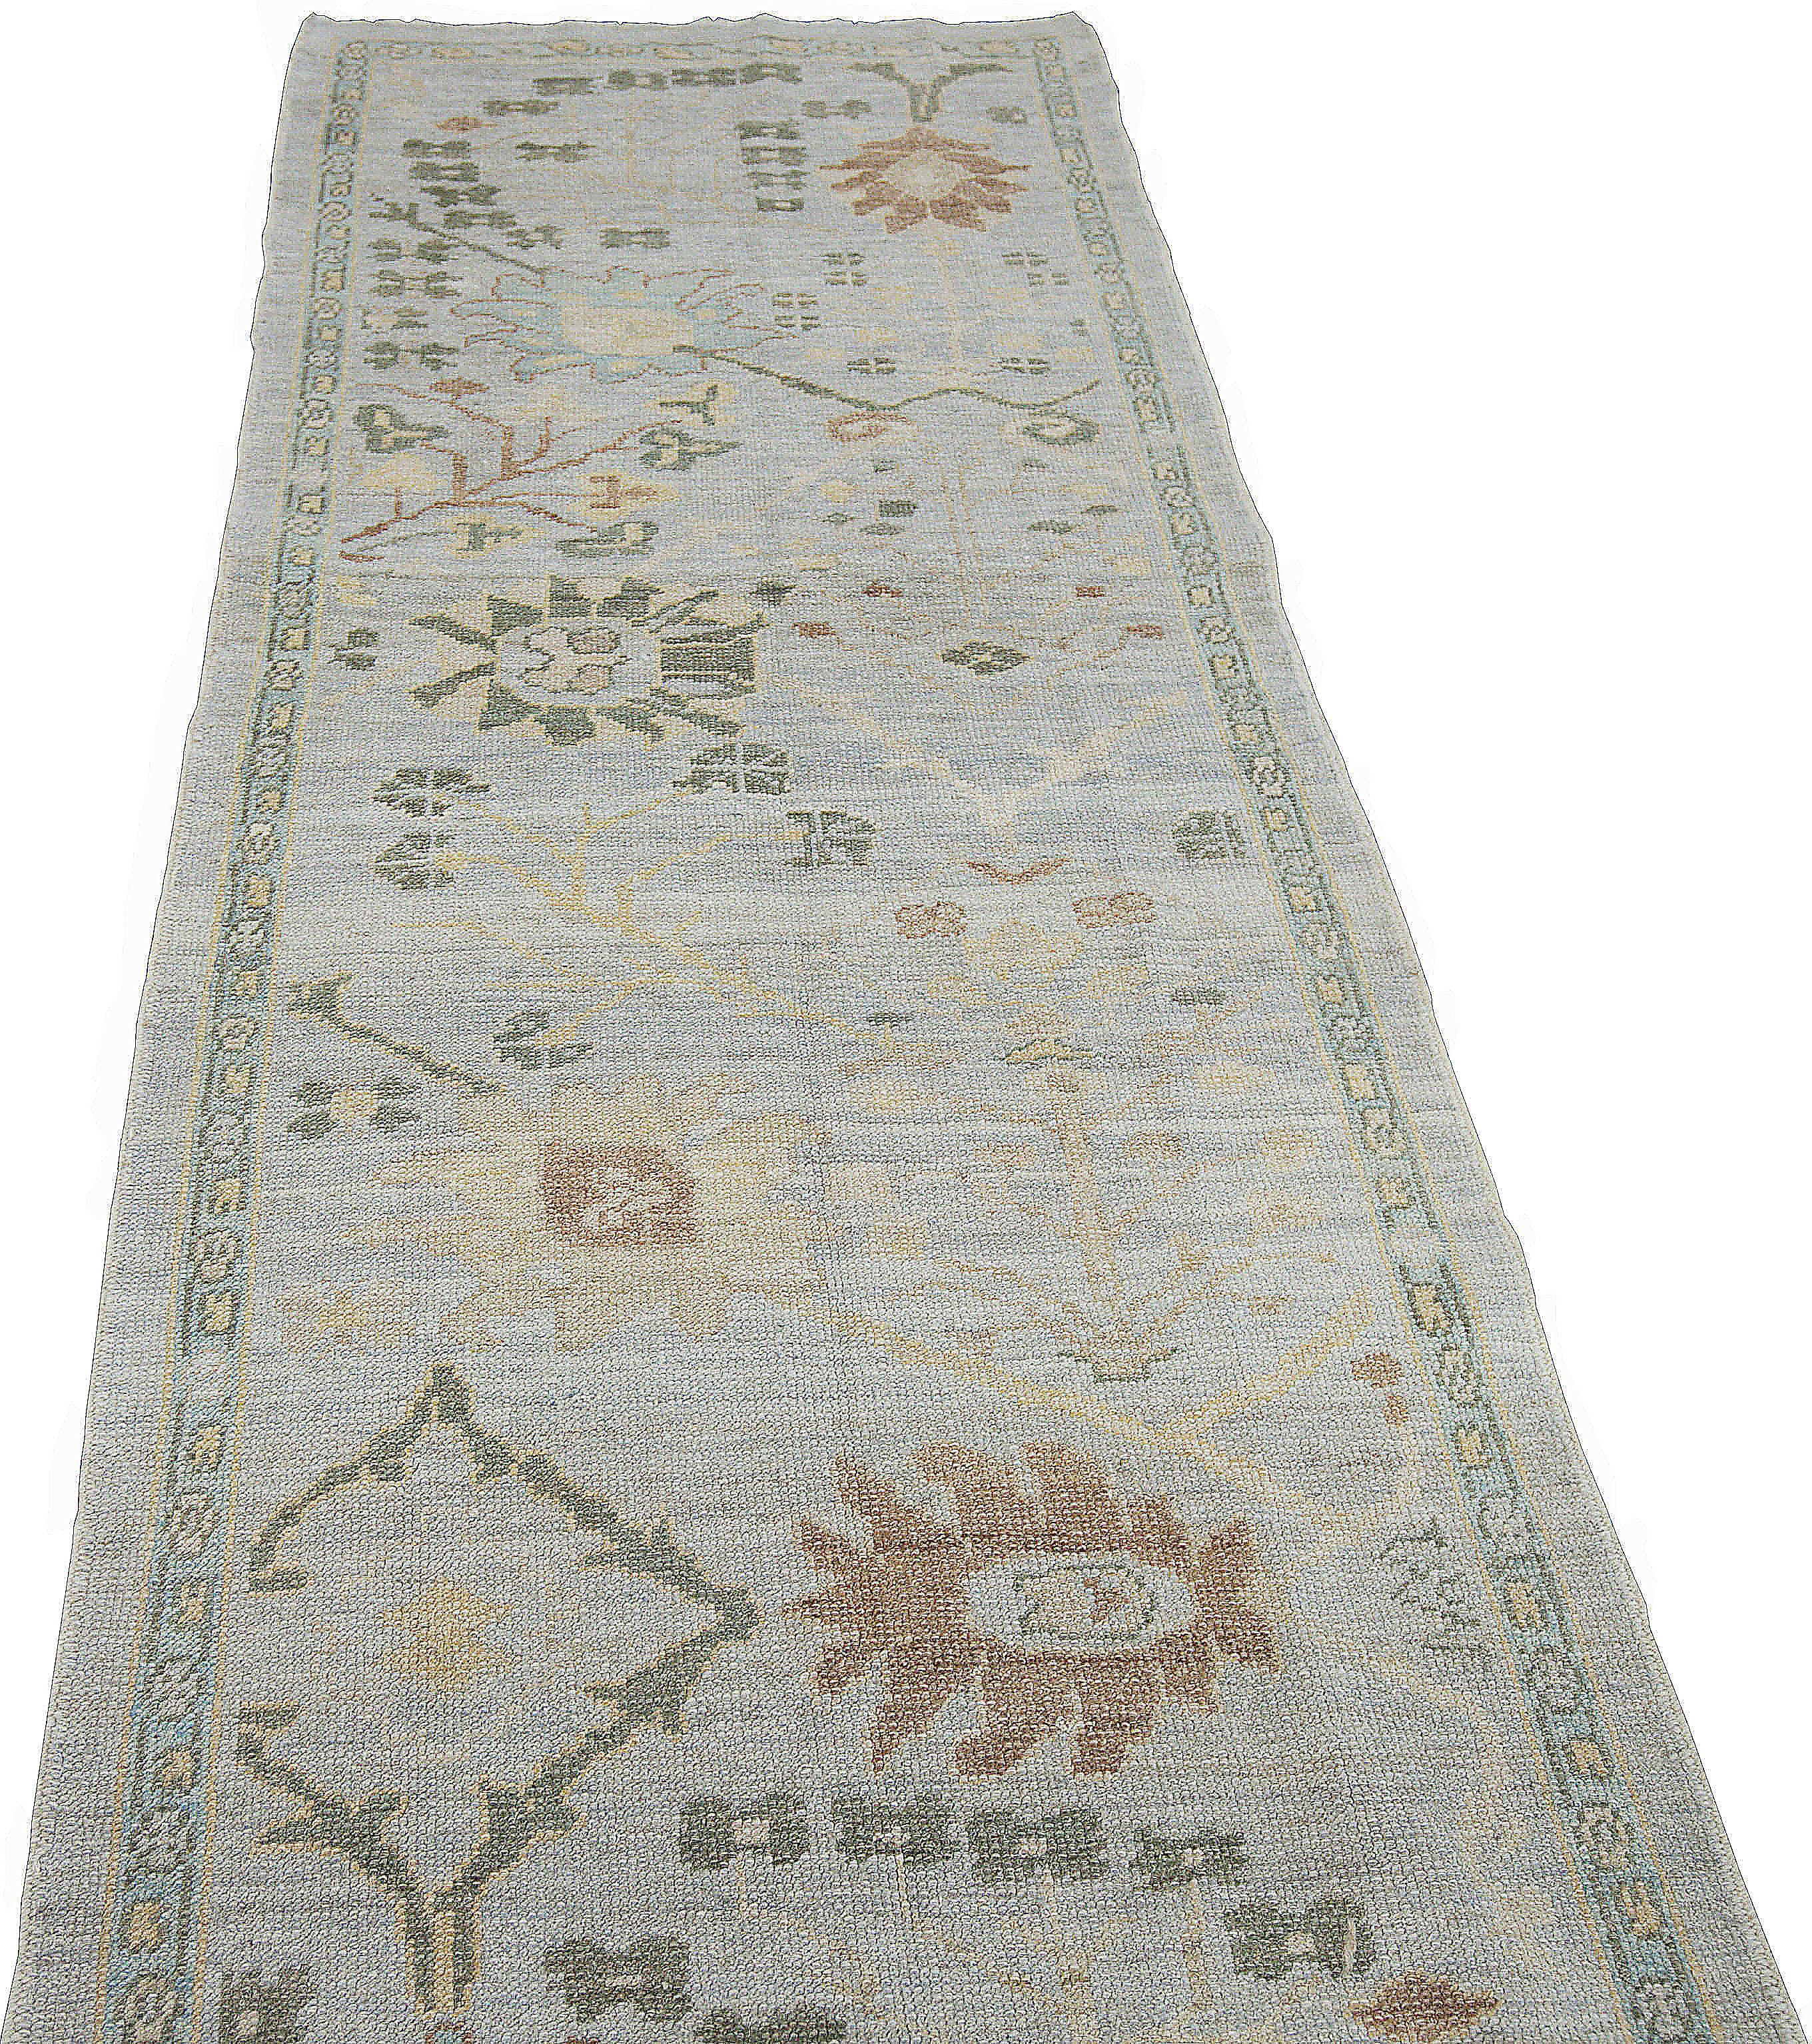 Turkish Modern Oushak Runner Rug in Gray with Floral Design Motifs in Brown and Green